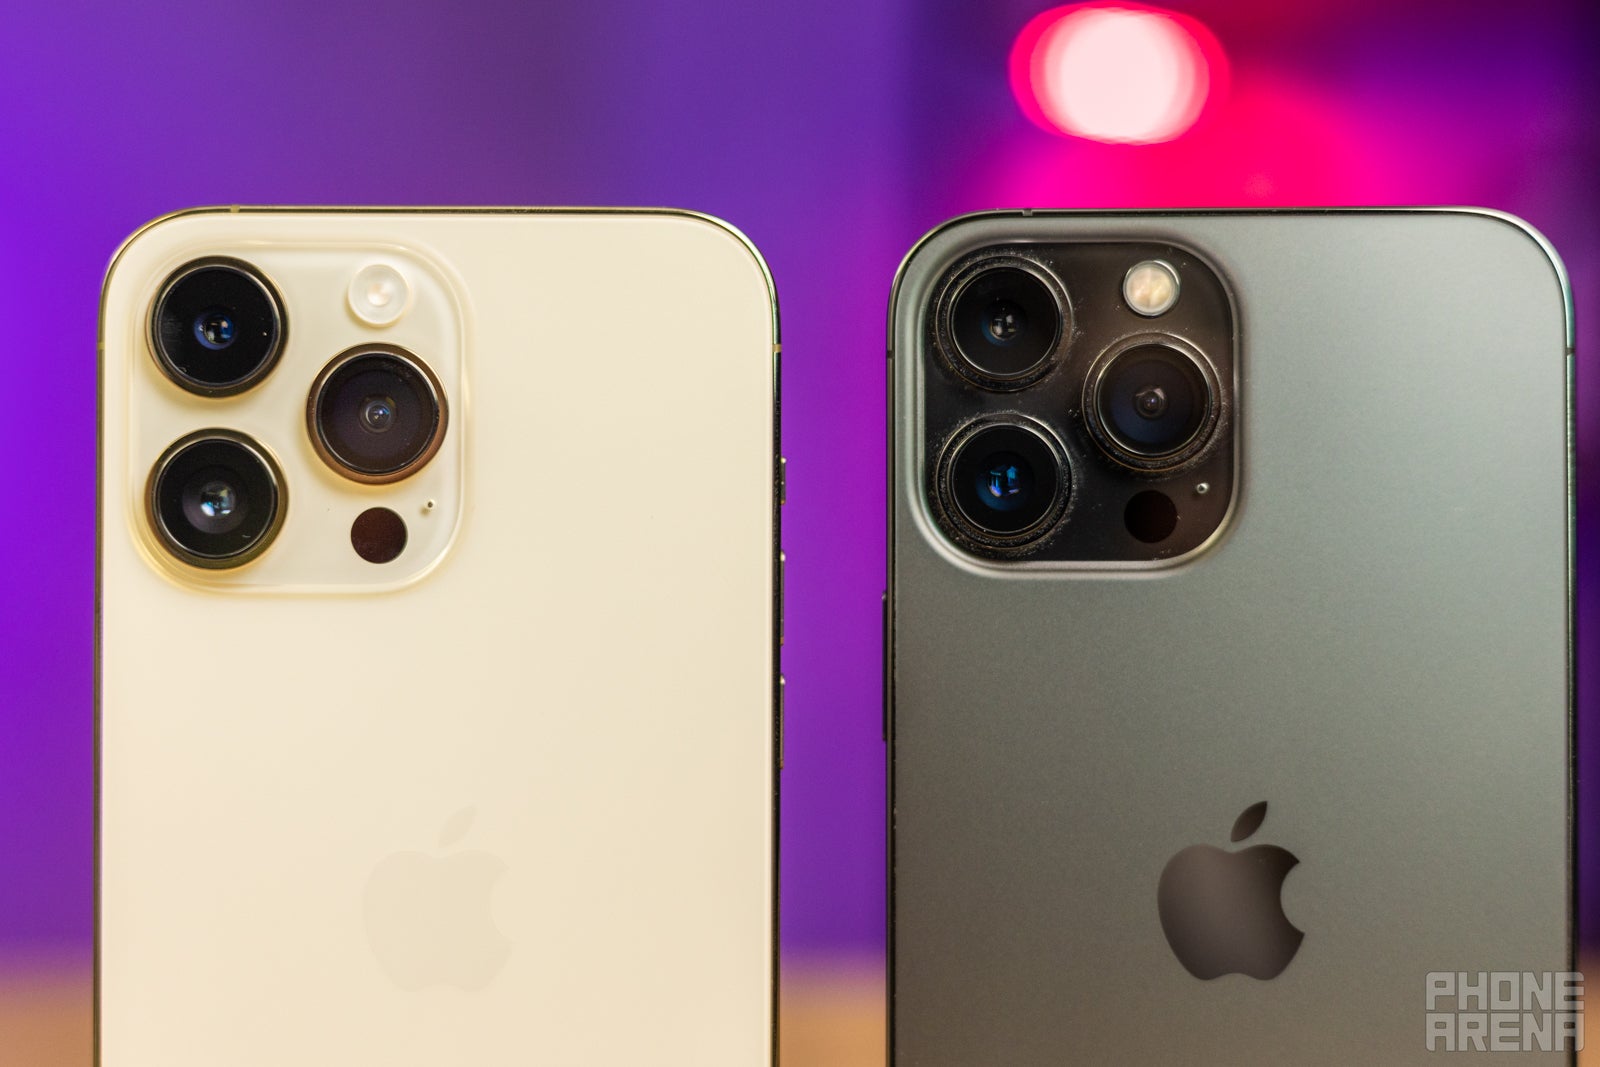 (Image credit - PhoneArena) iPhone 14 Pro Max vs 13 Pro Max cameras - iPhone 14 Pro Max vs iPhone 13 Pro Max: main differences